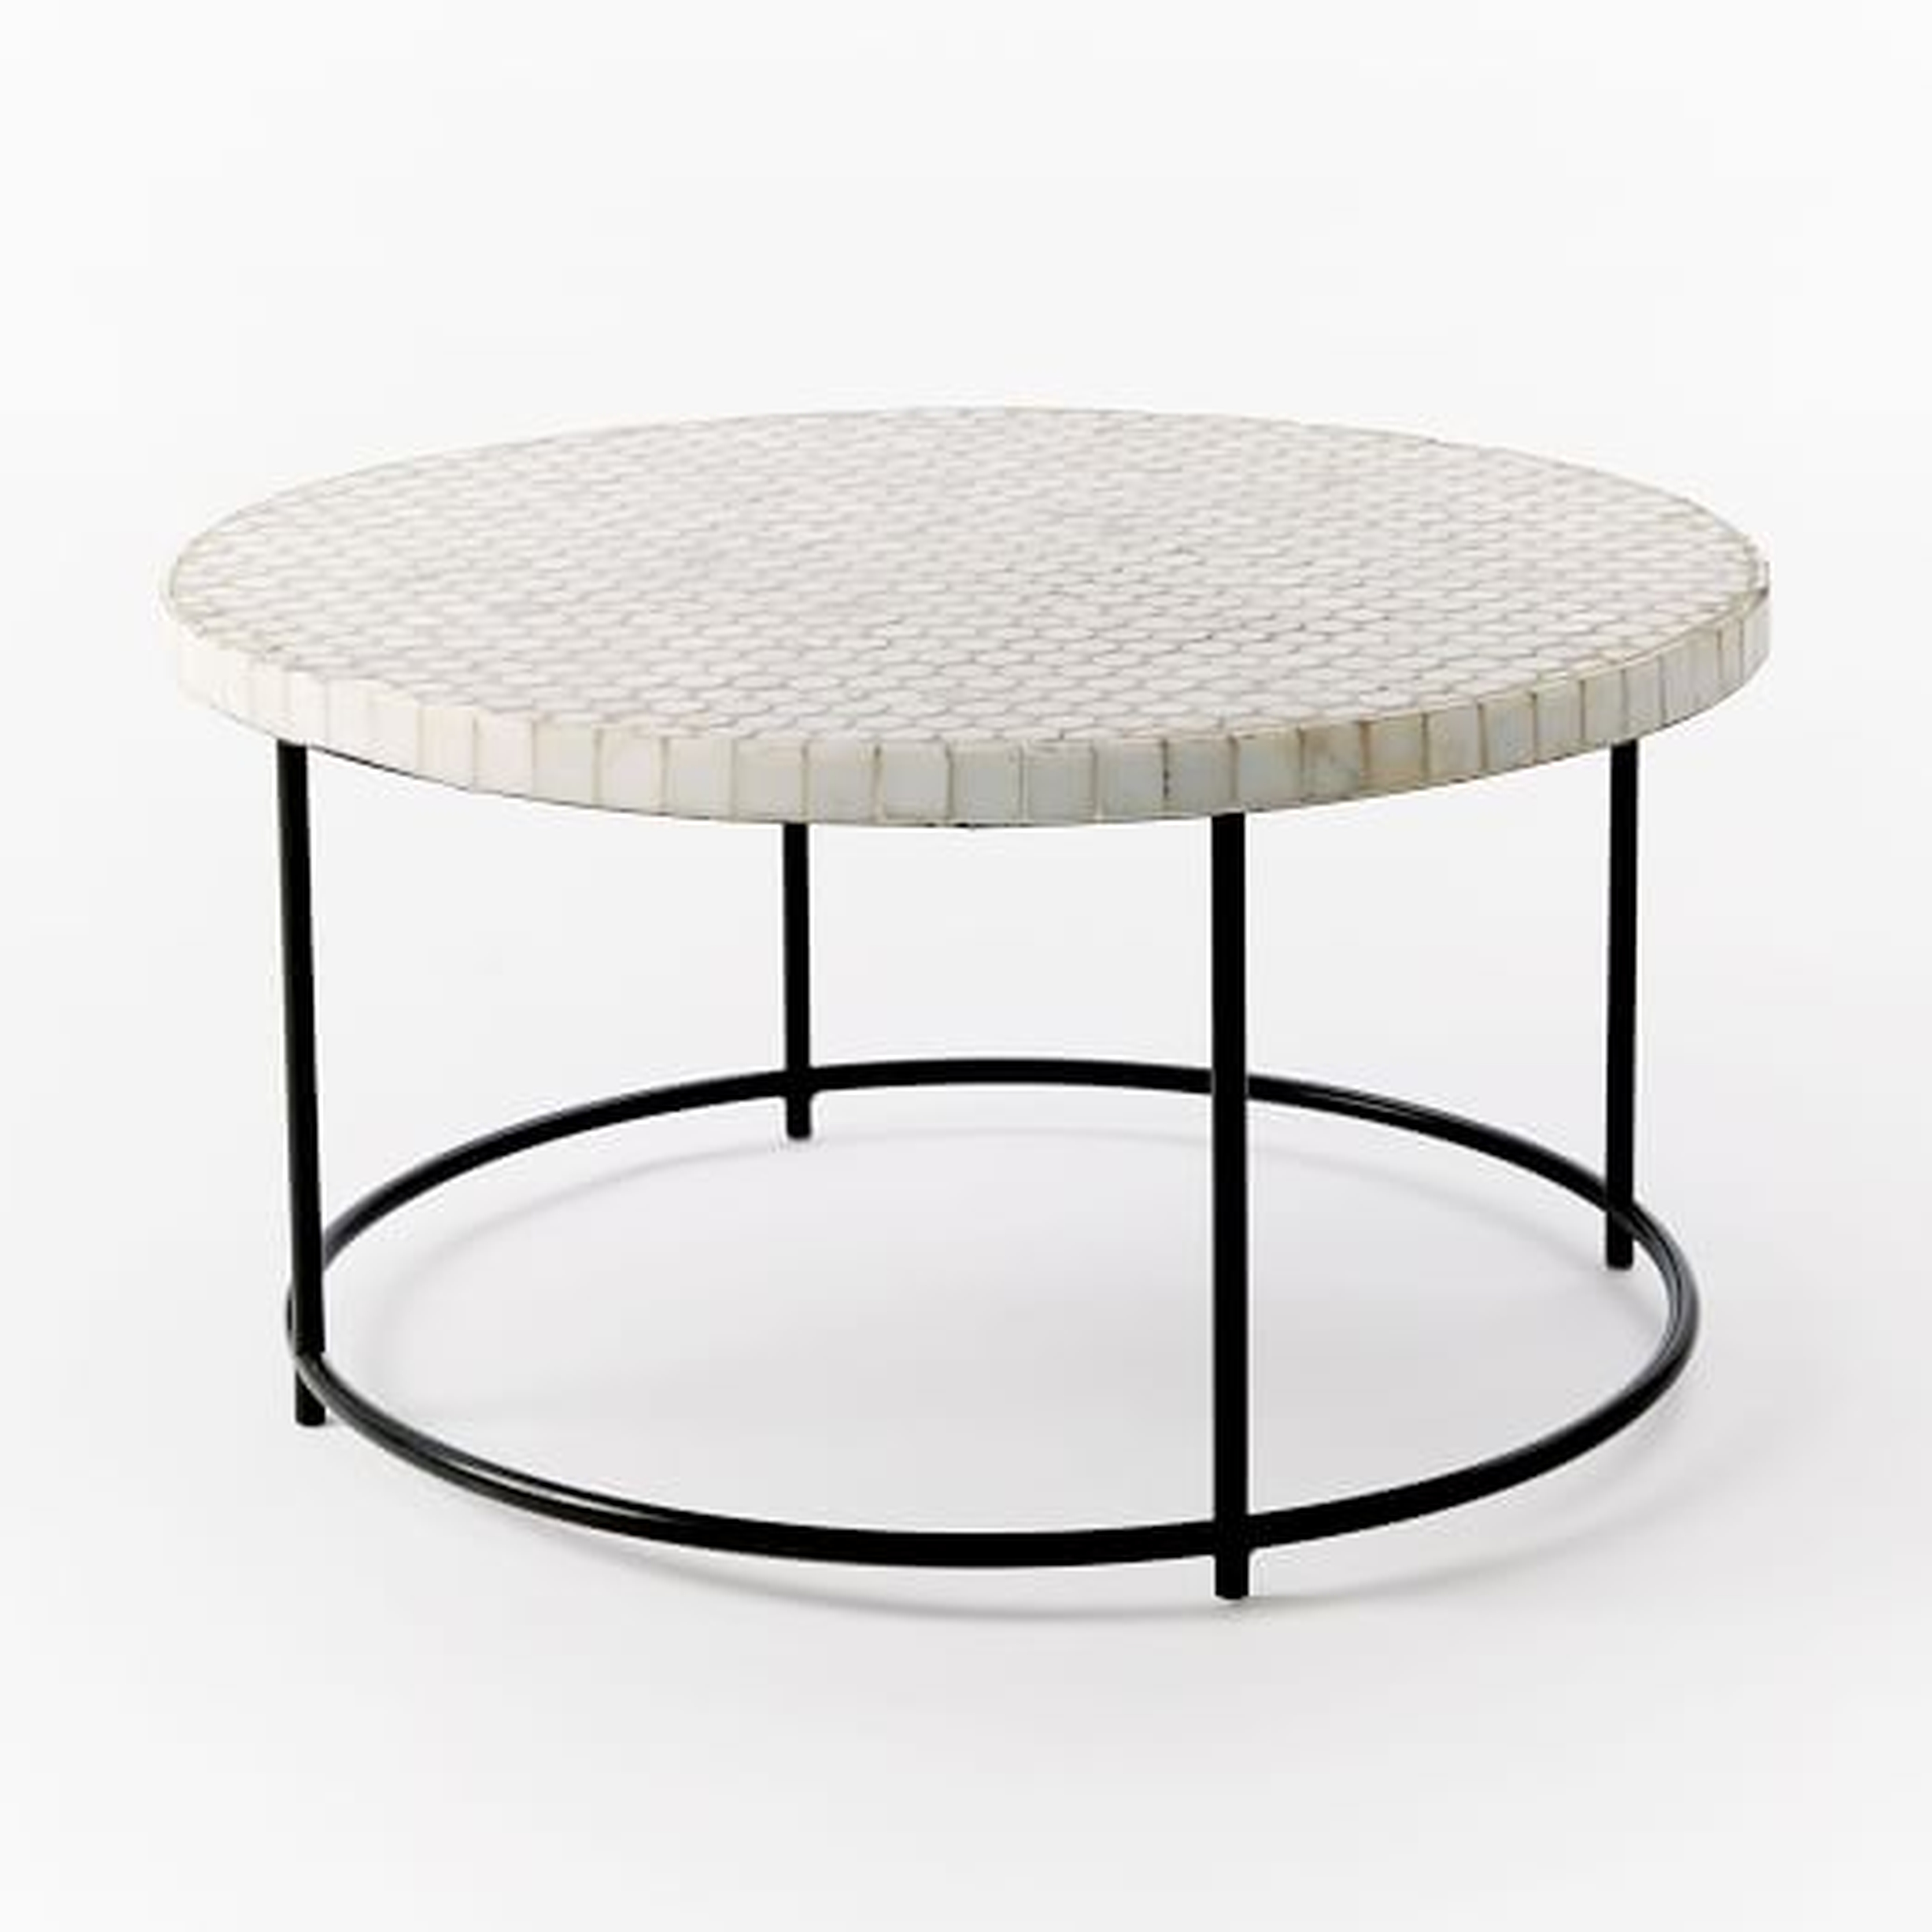 Mosaic Tiled Outdoor Coffee Table, White Penny/Antique Bronze - West Elm